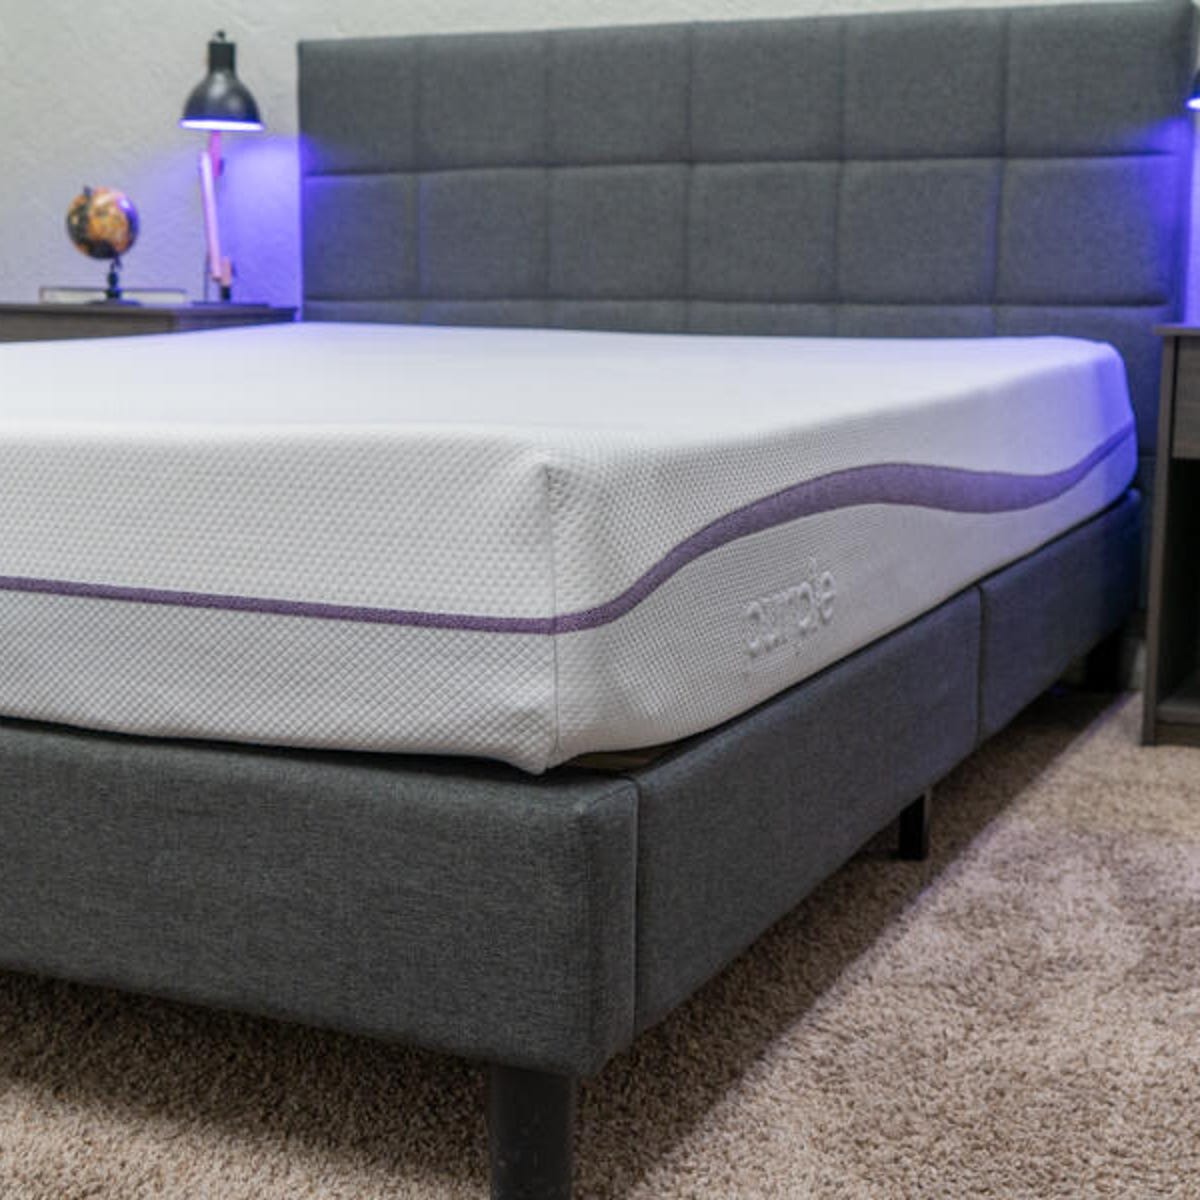 How to Effortlessly Return Your Purple Mattress Today